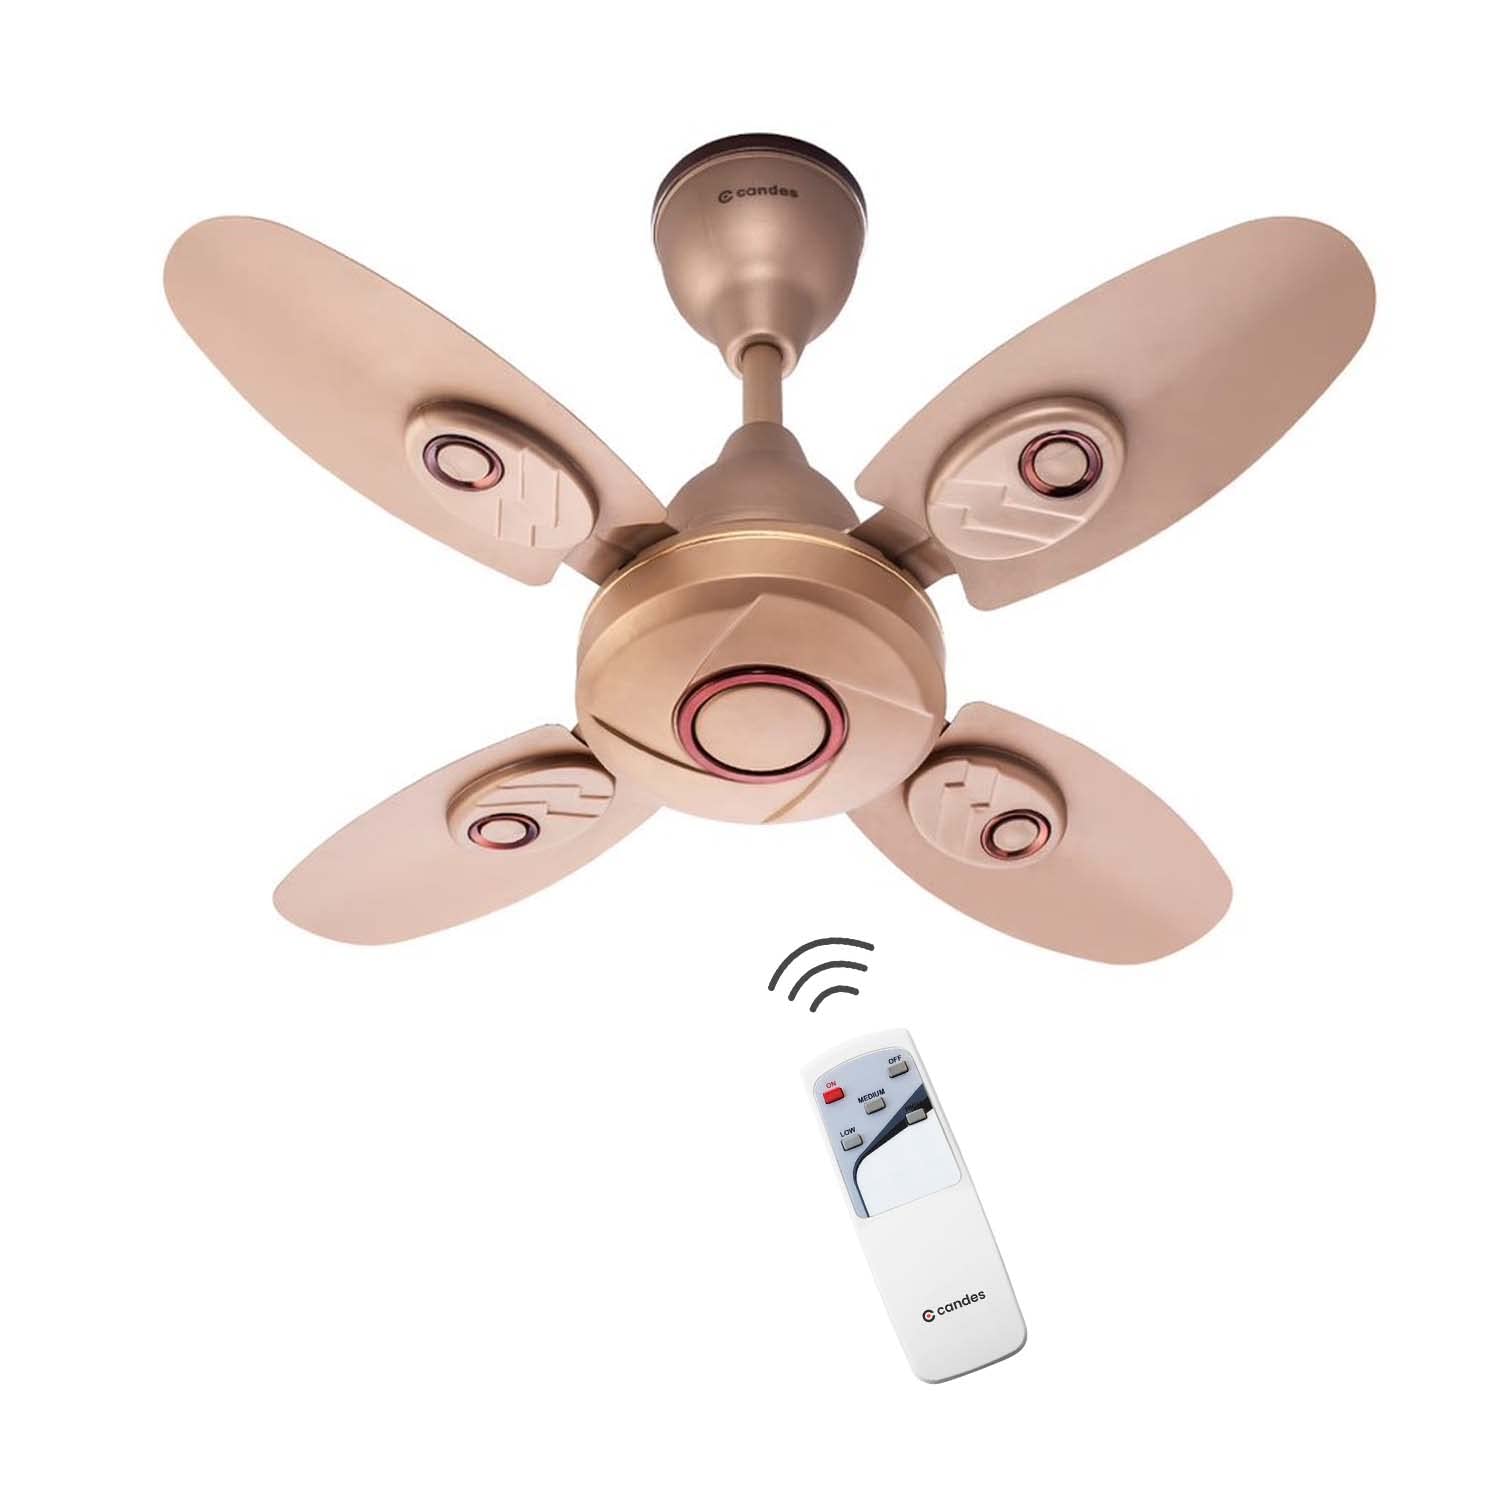 Candes Nexo 600 mm Ultra High Speed Decorative 4 Blade Ceiling Fan With Remote (Pack of 1) (Golden)